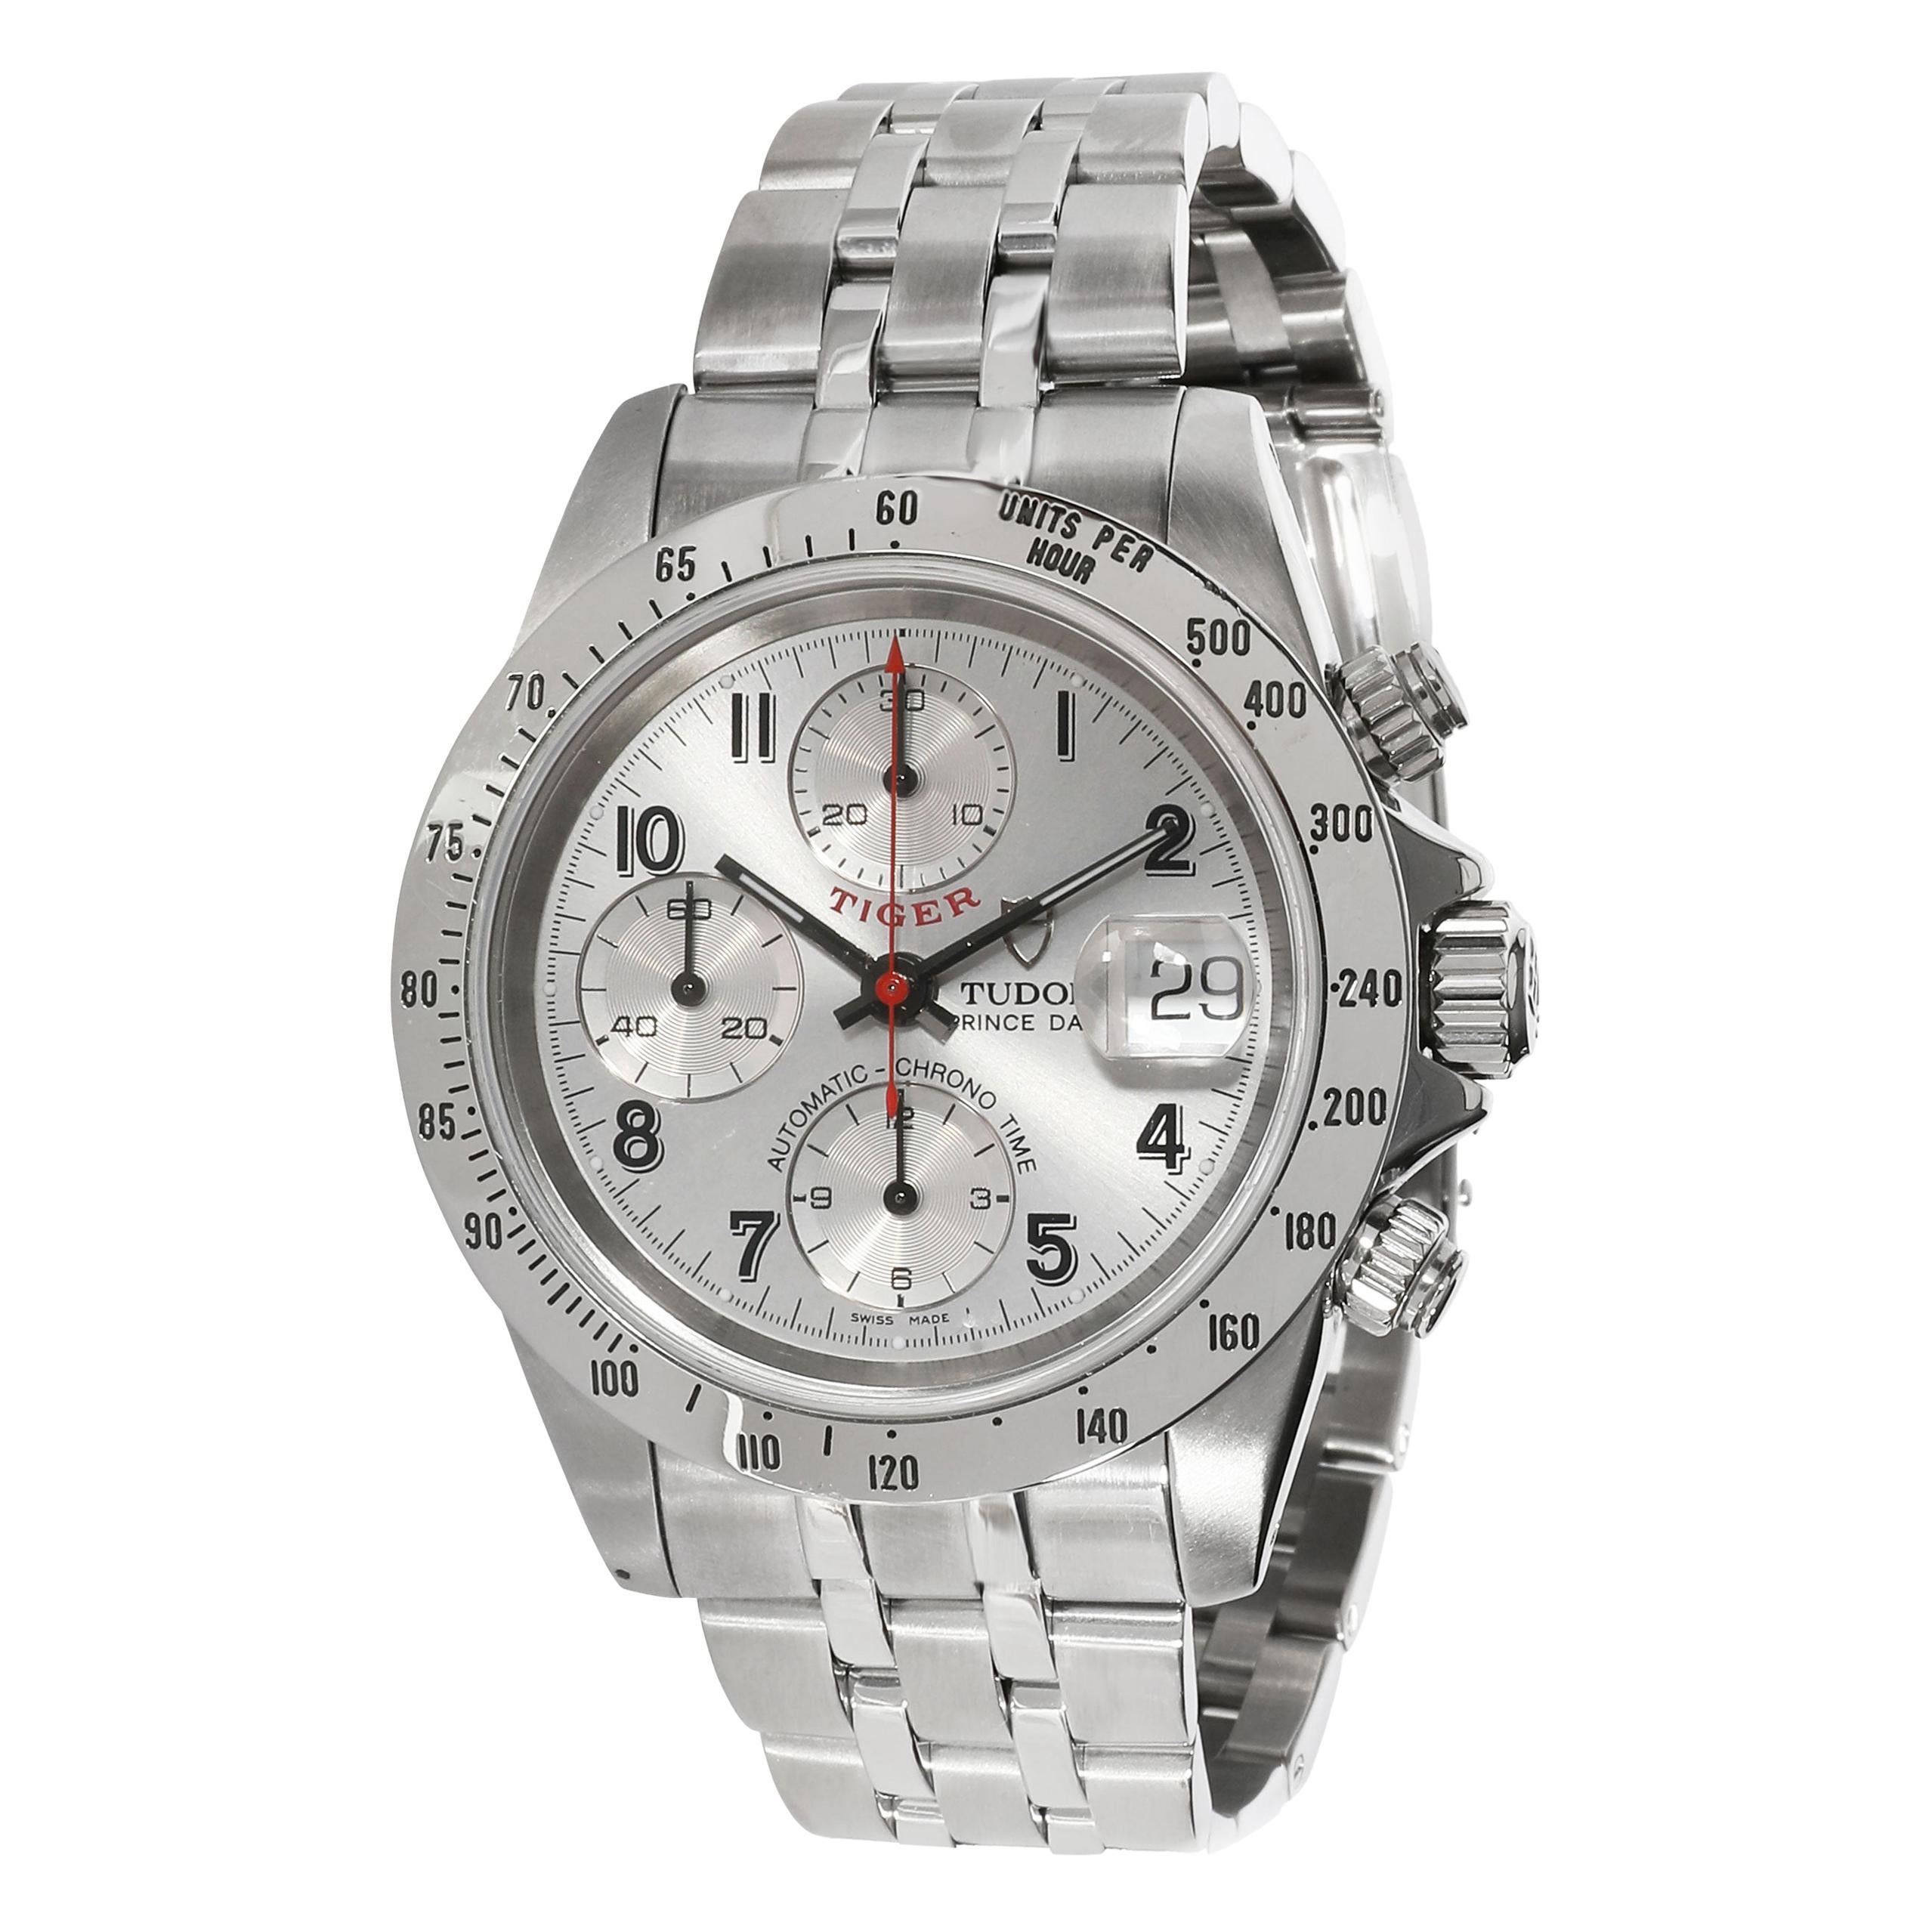 Tudor Prince Date Tiger 79280 Men's Watch in Stainless Steel